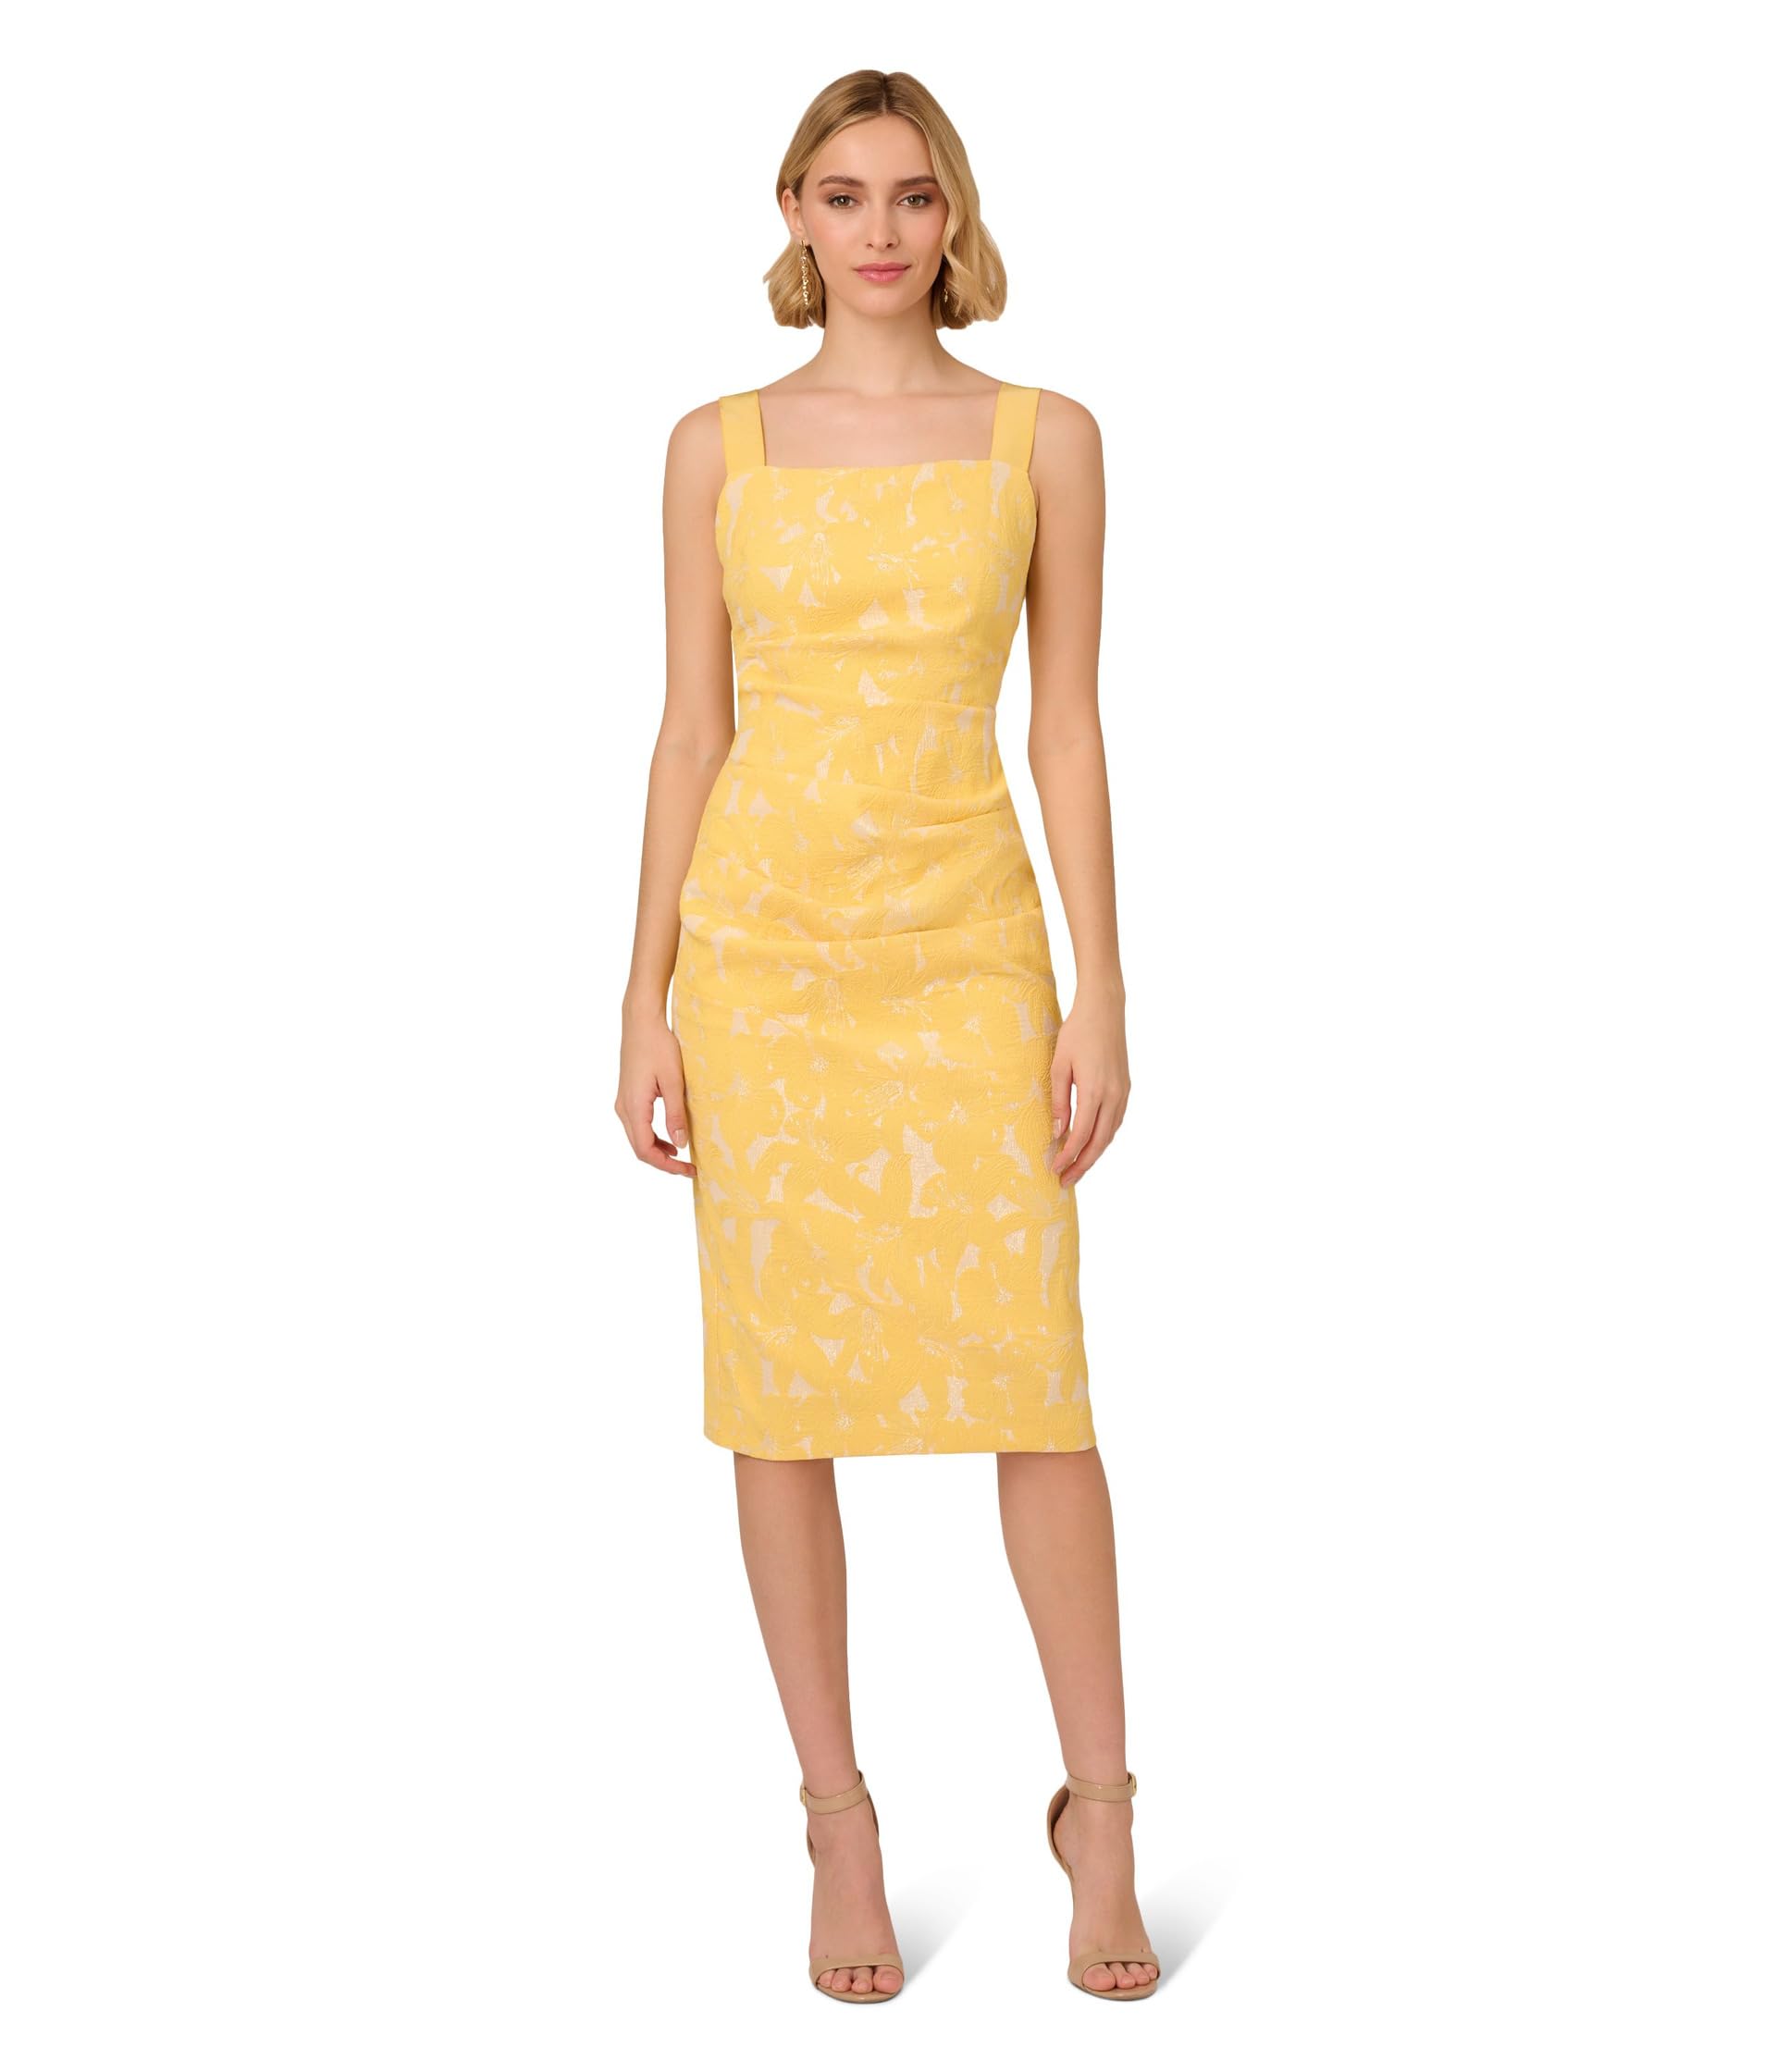 Hibiscus Jacquard Tucked Dress Adrianna Papell